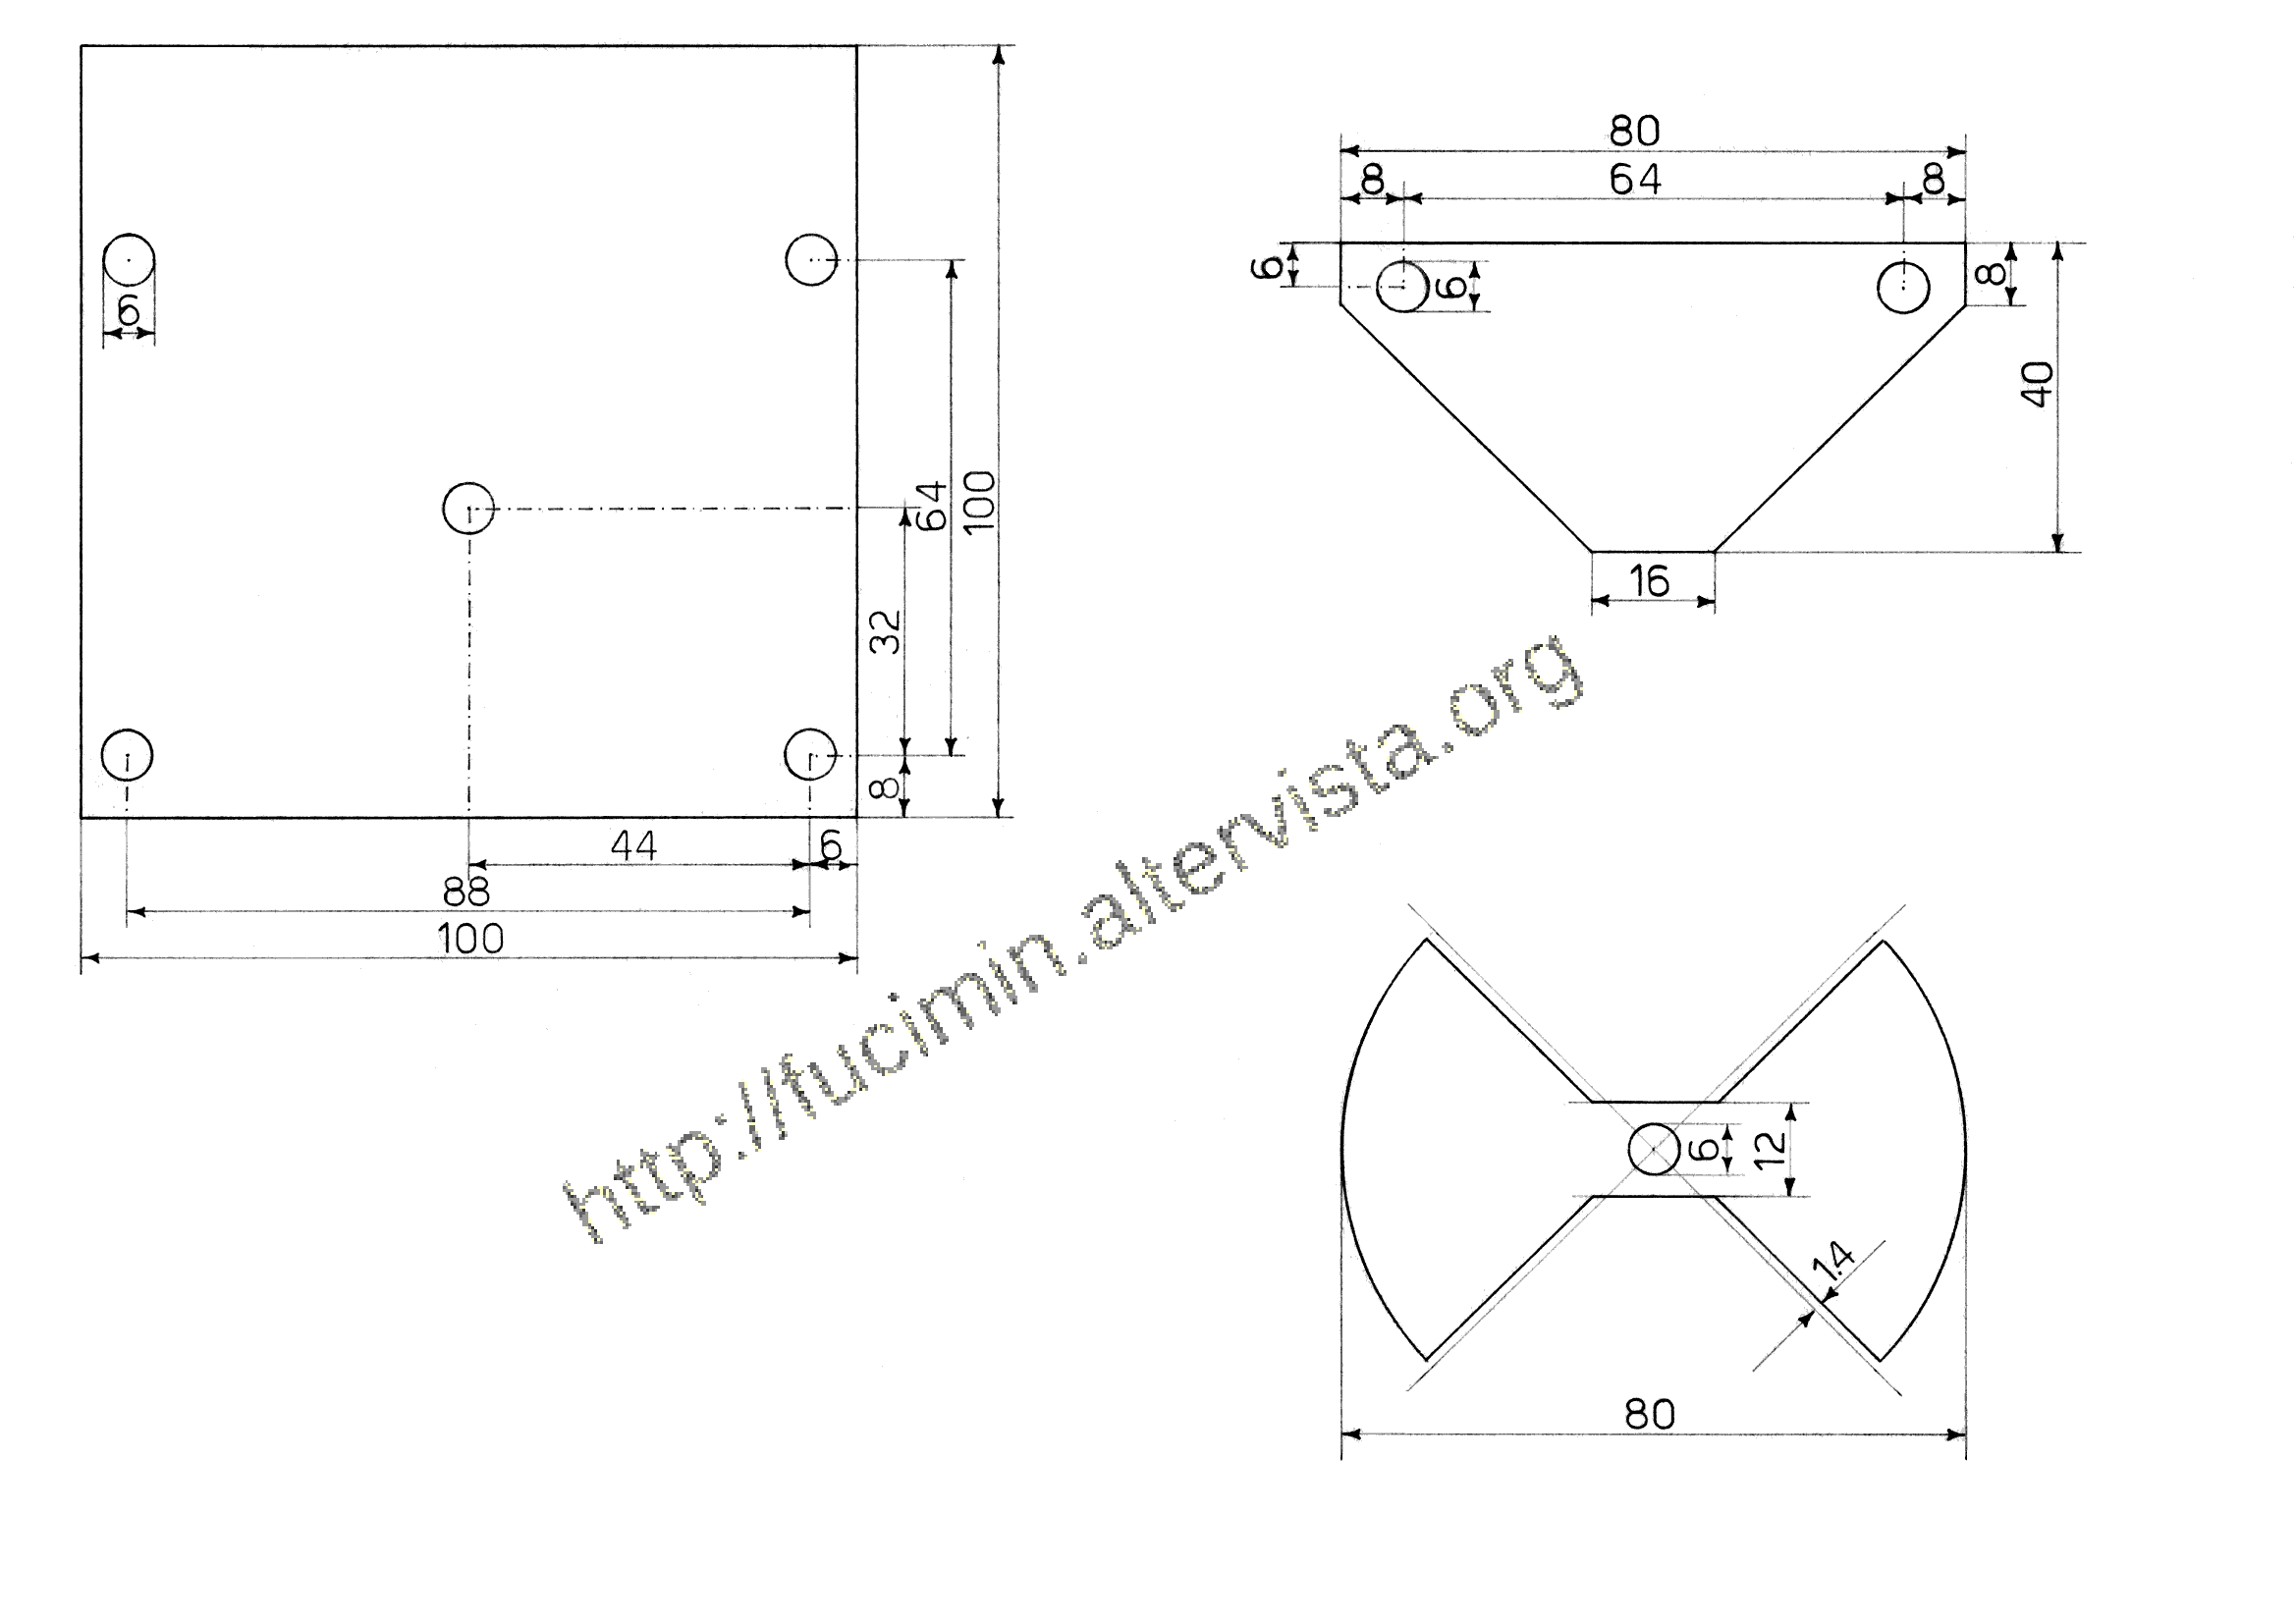 design of the homemade butterfly capacitor